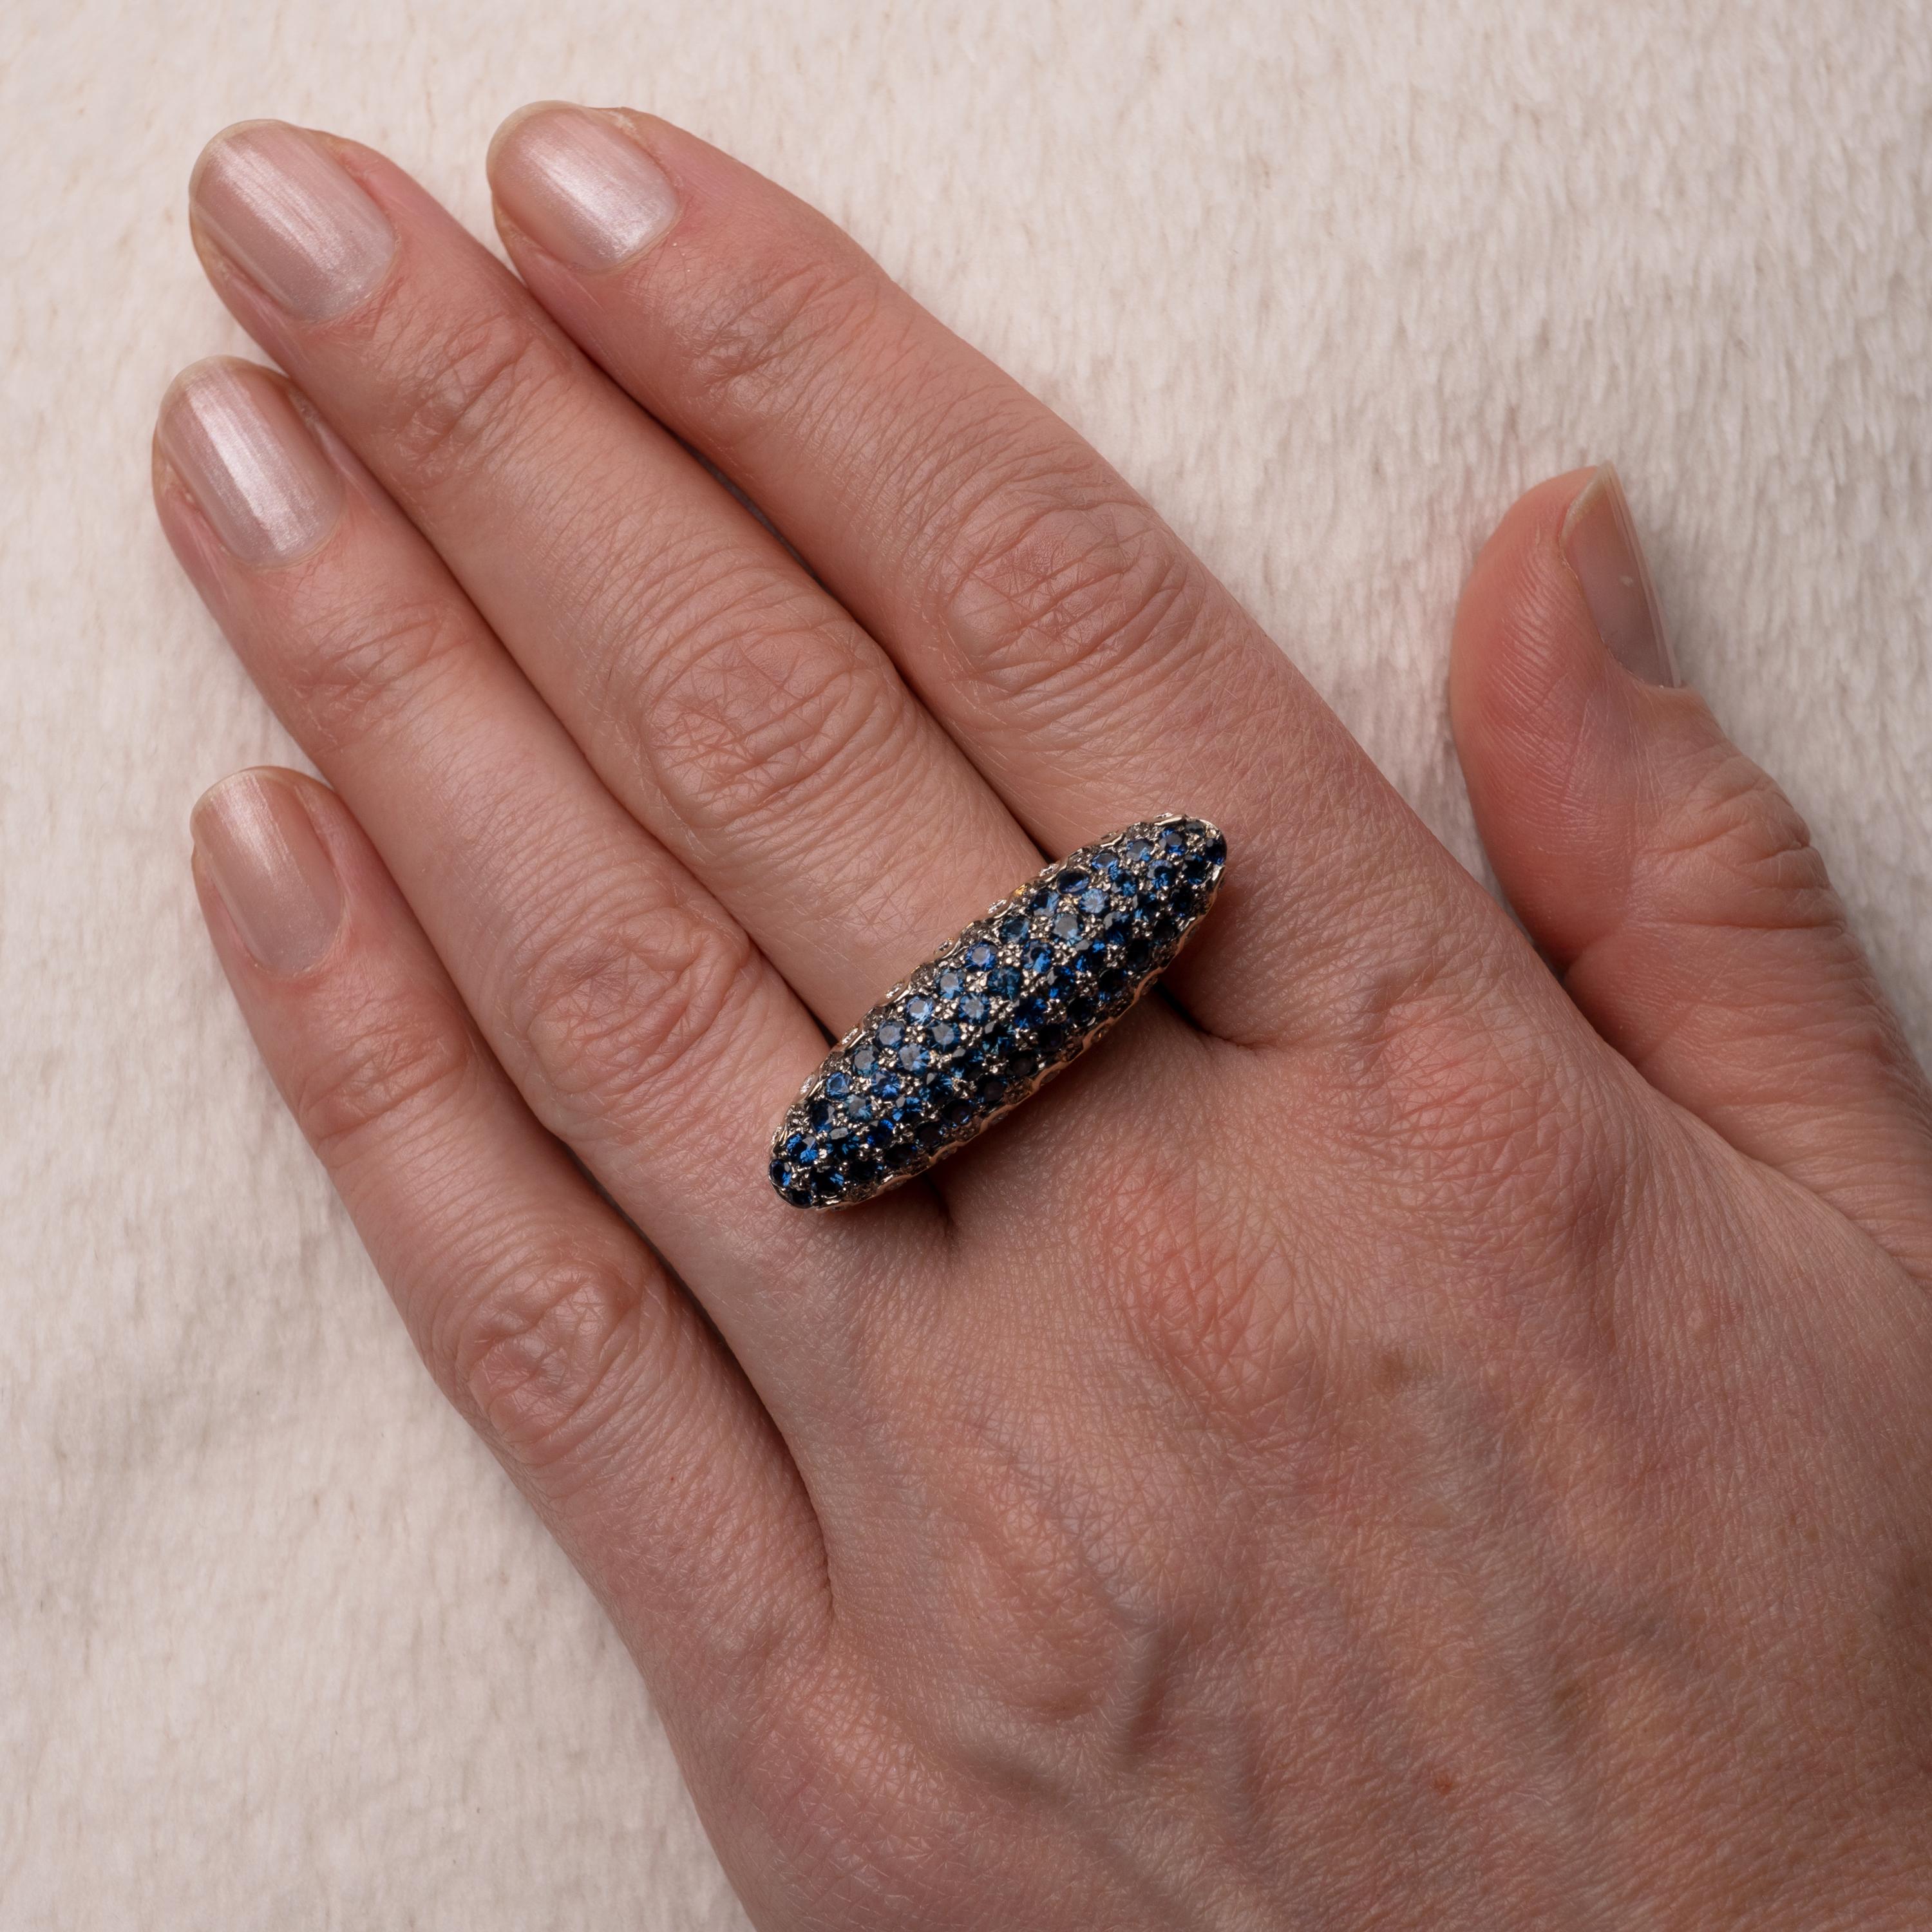 This outrageously good Sapphire & Diamonds torpedo-shaped ring sits horizontally on and spans across almost three fingers!

This fabulous and extremely eye-catching cocktail statement ring is crafted in 18 karat gold and adorned with 54 round-cut